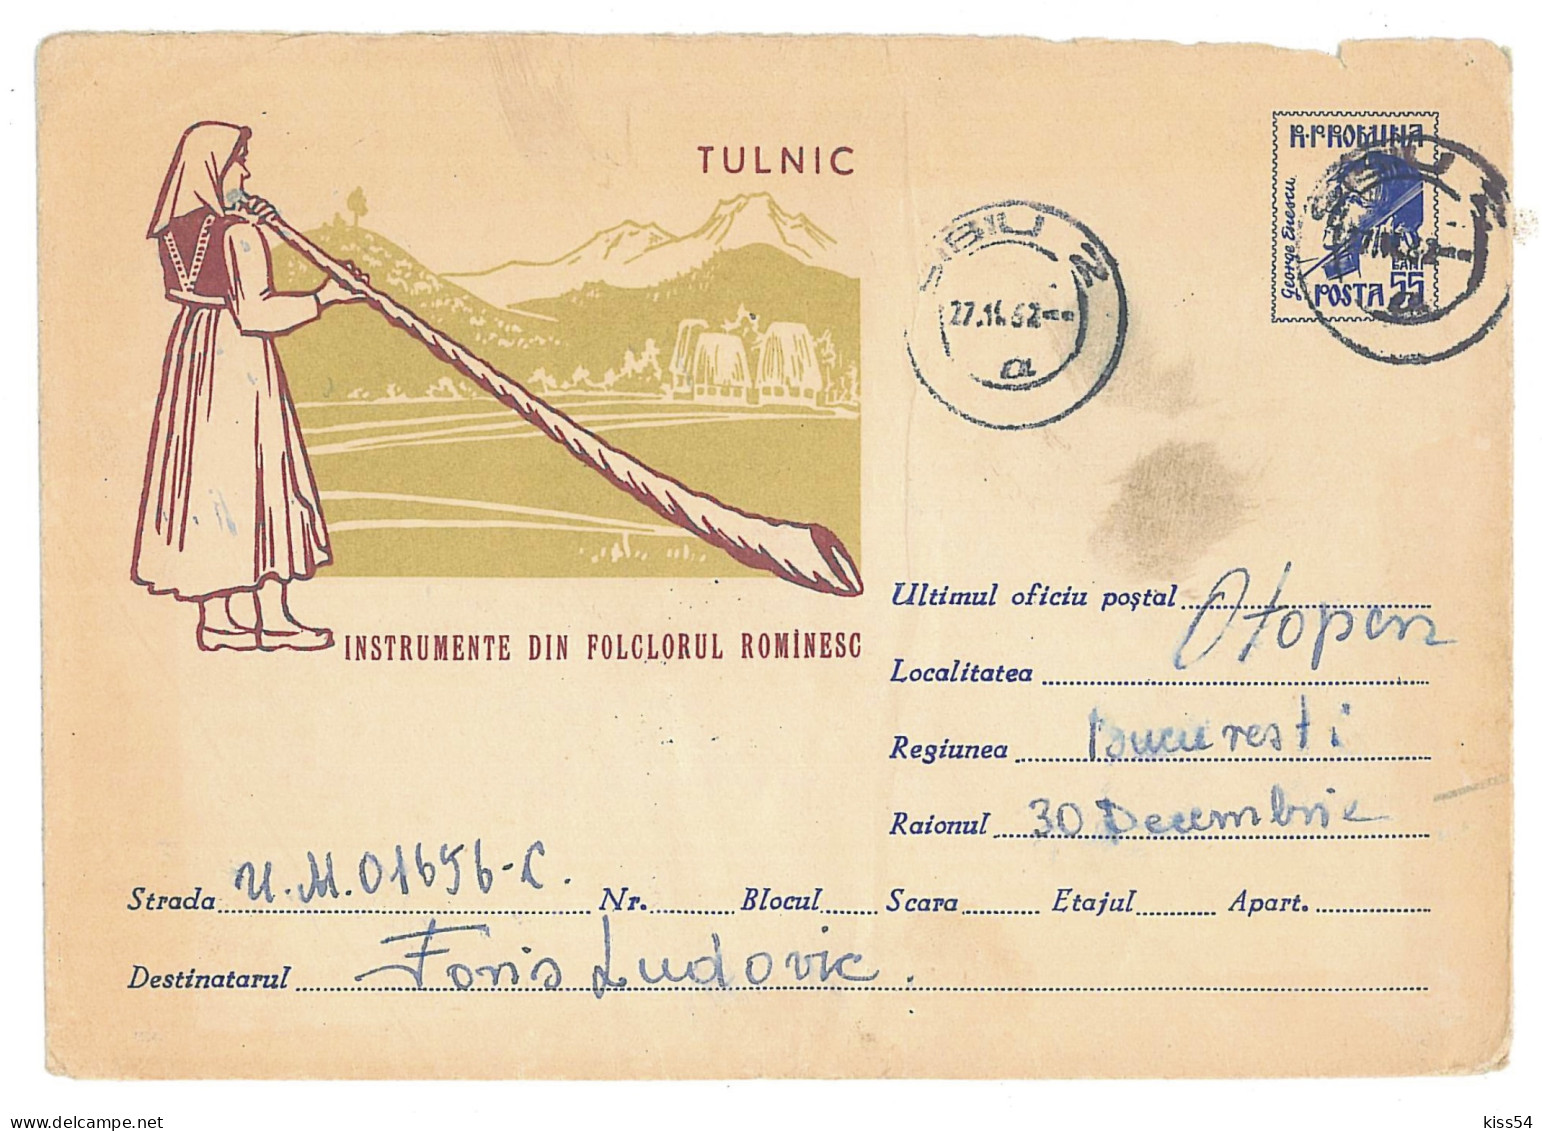 IP 61 - 0492a MUSIC, Popular Musical Instruments, Tulnic, Romania - Stationery - Used - 1961 - Postal Stationery